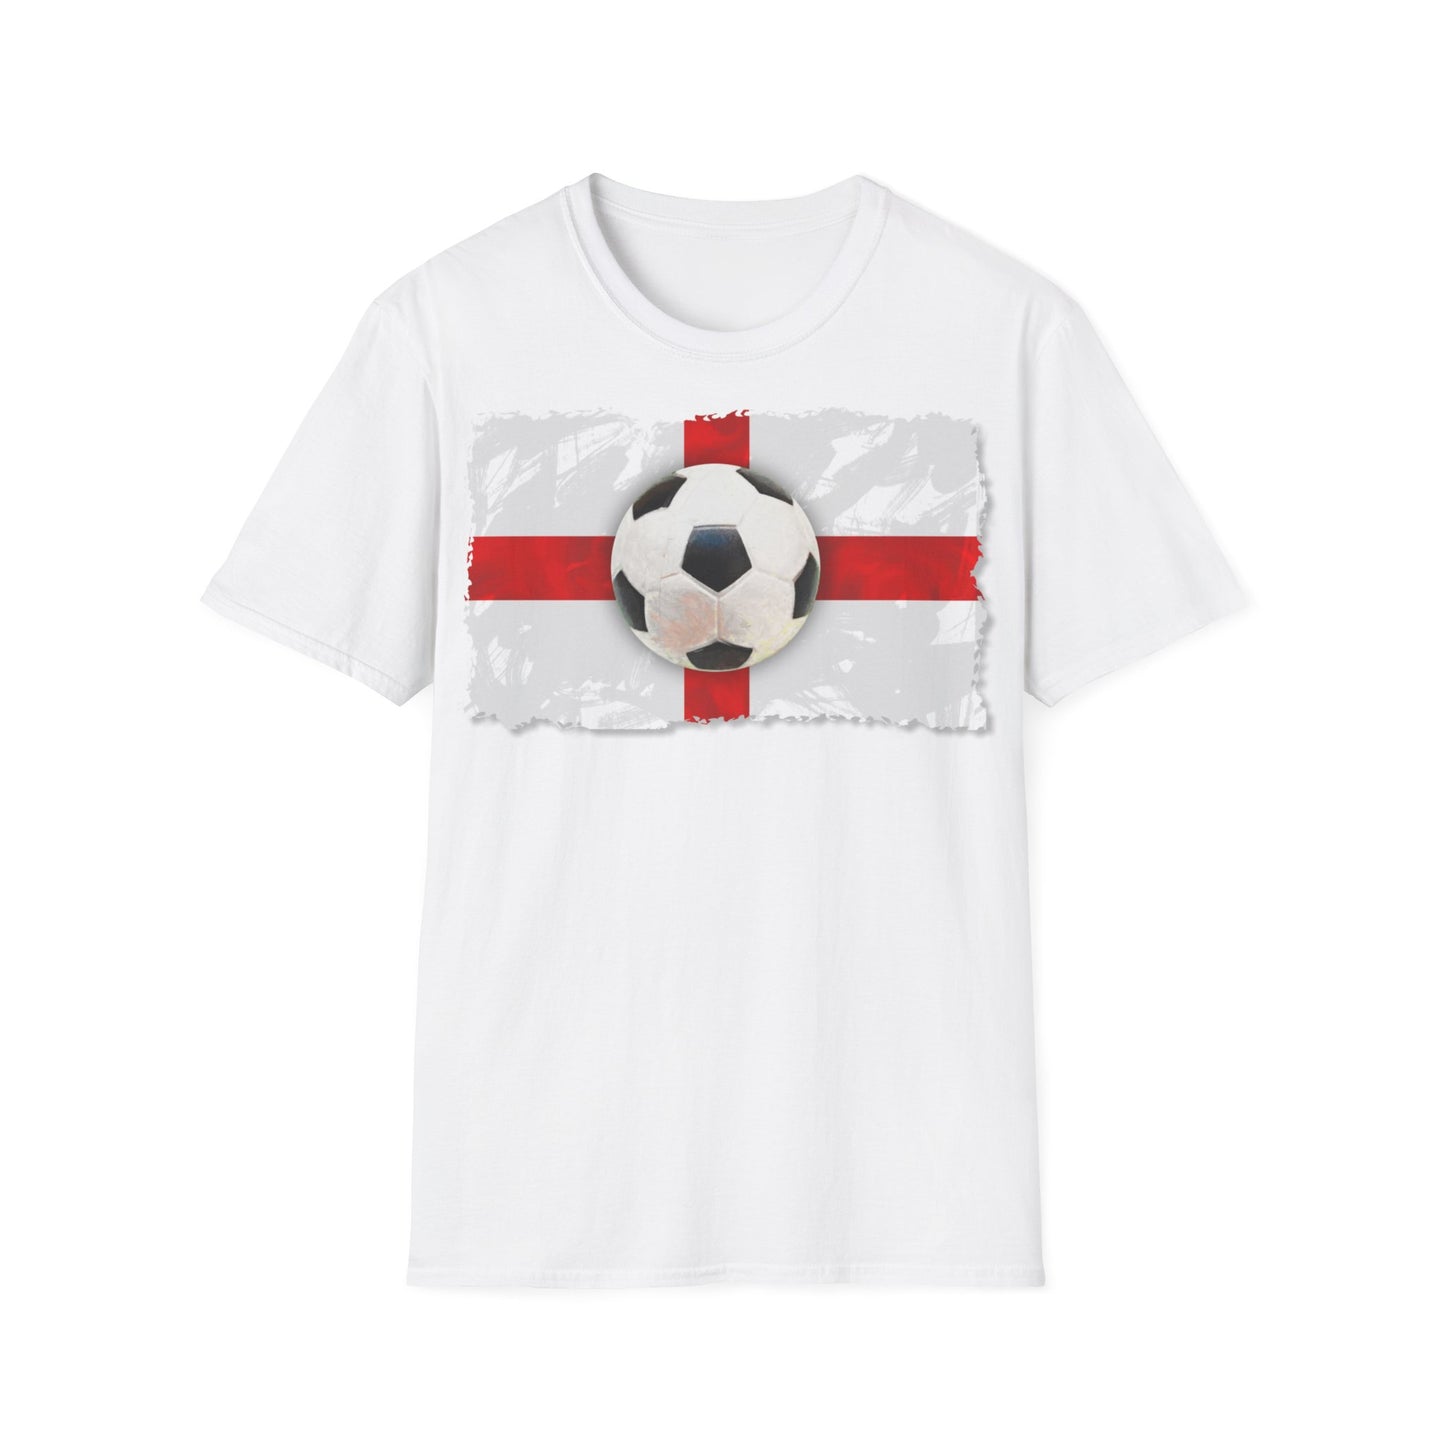 A white t-shirt with a painted design of the English flag and a football in the middle